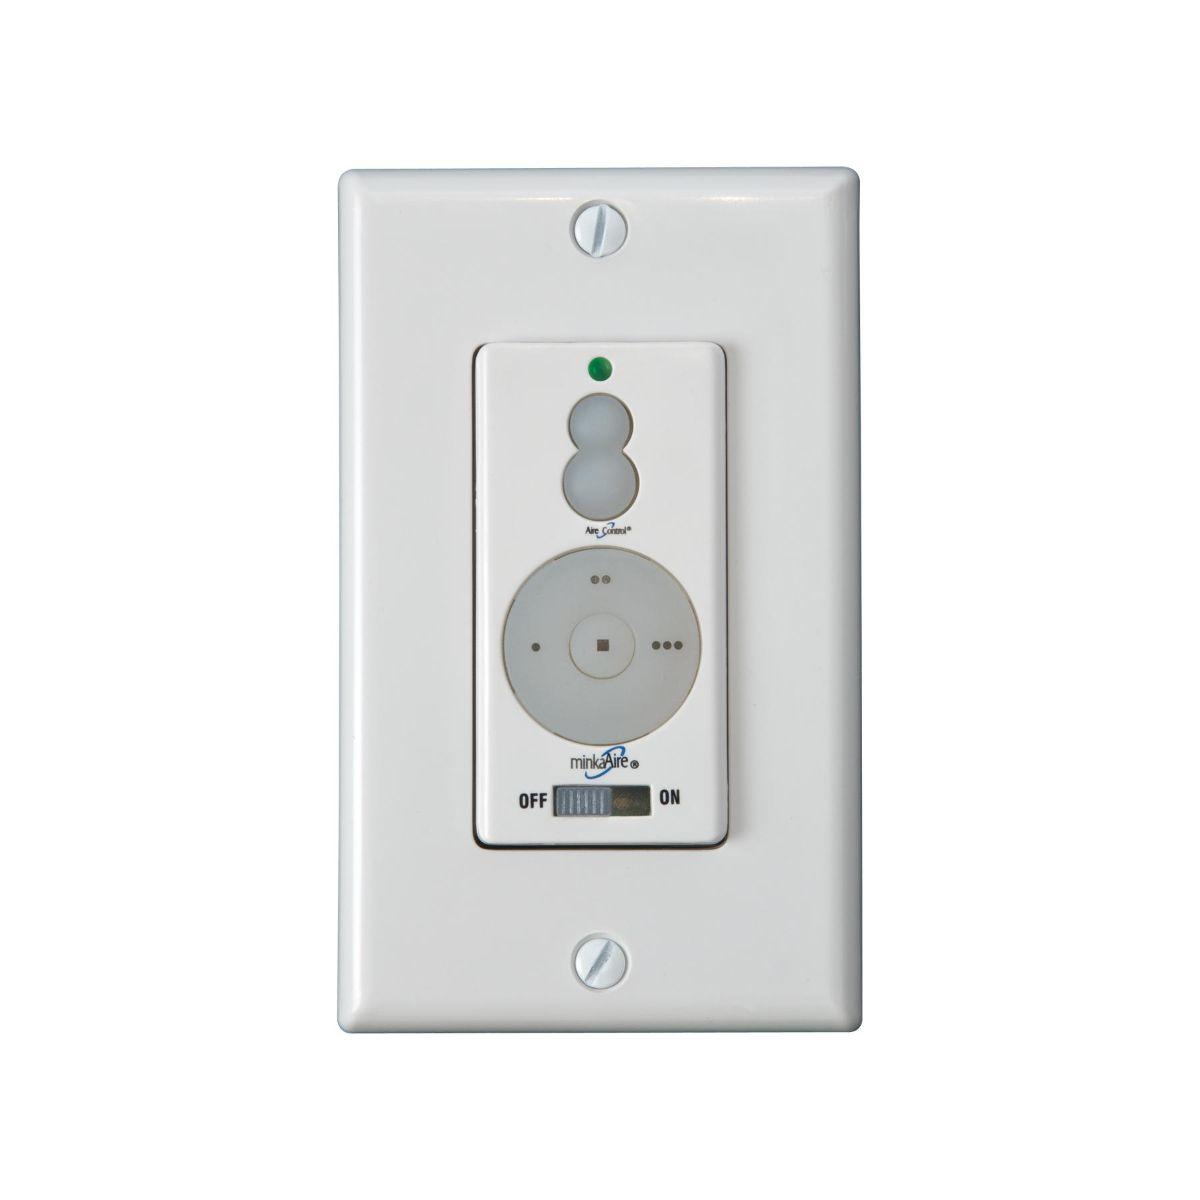 3-Speed Wall Mount Ceiling Fan And Light Control